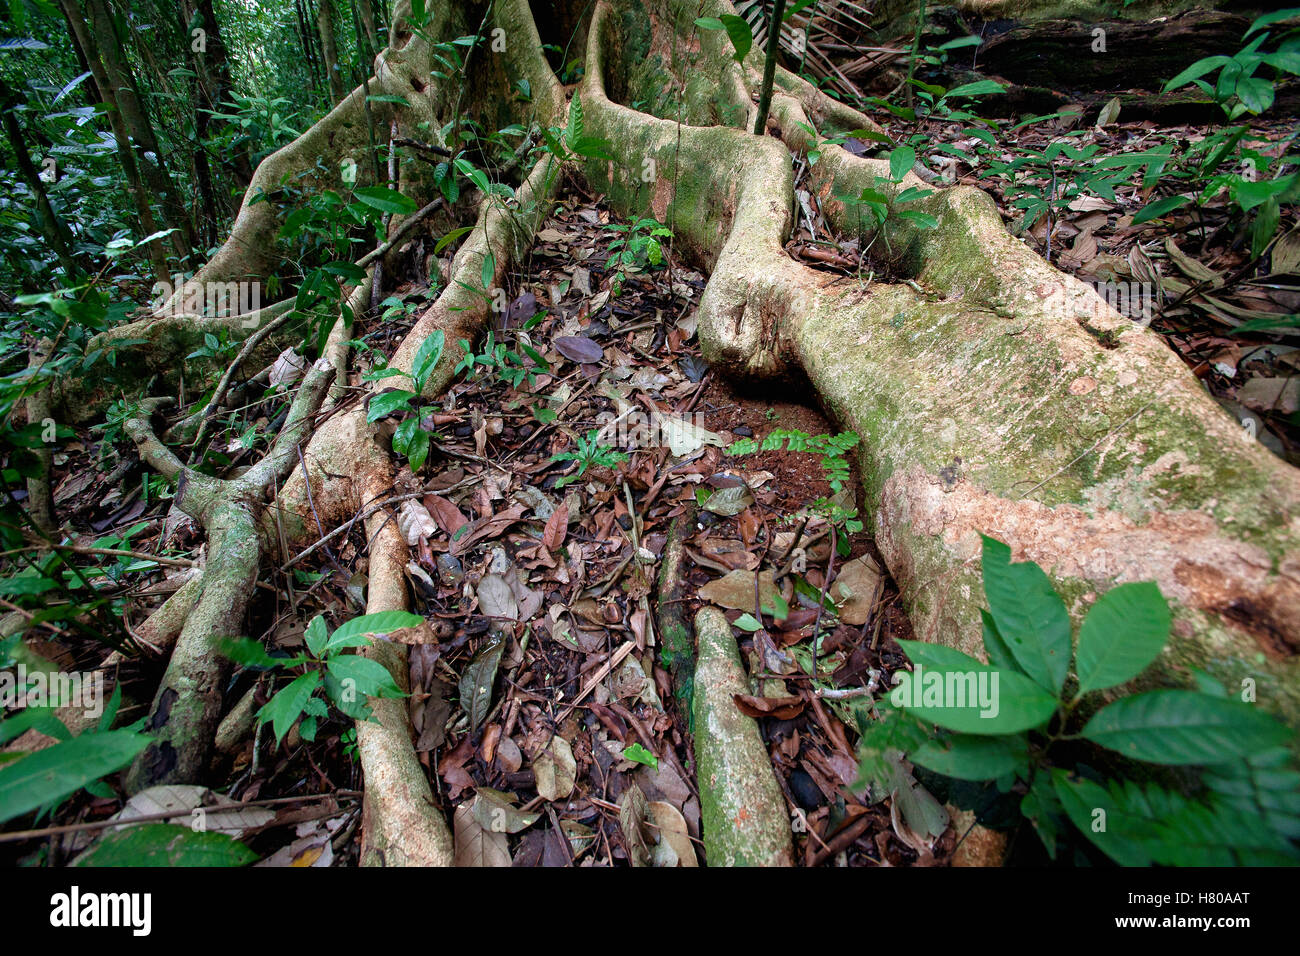 Roots along forest floor to get nutrients released by decaying litter rather than underground, Barro Colorado Island, Panama Stock Photo